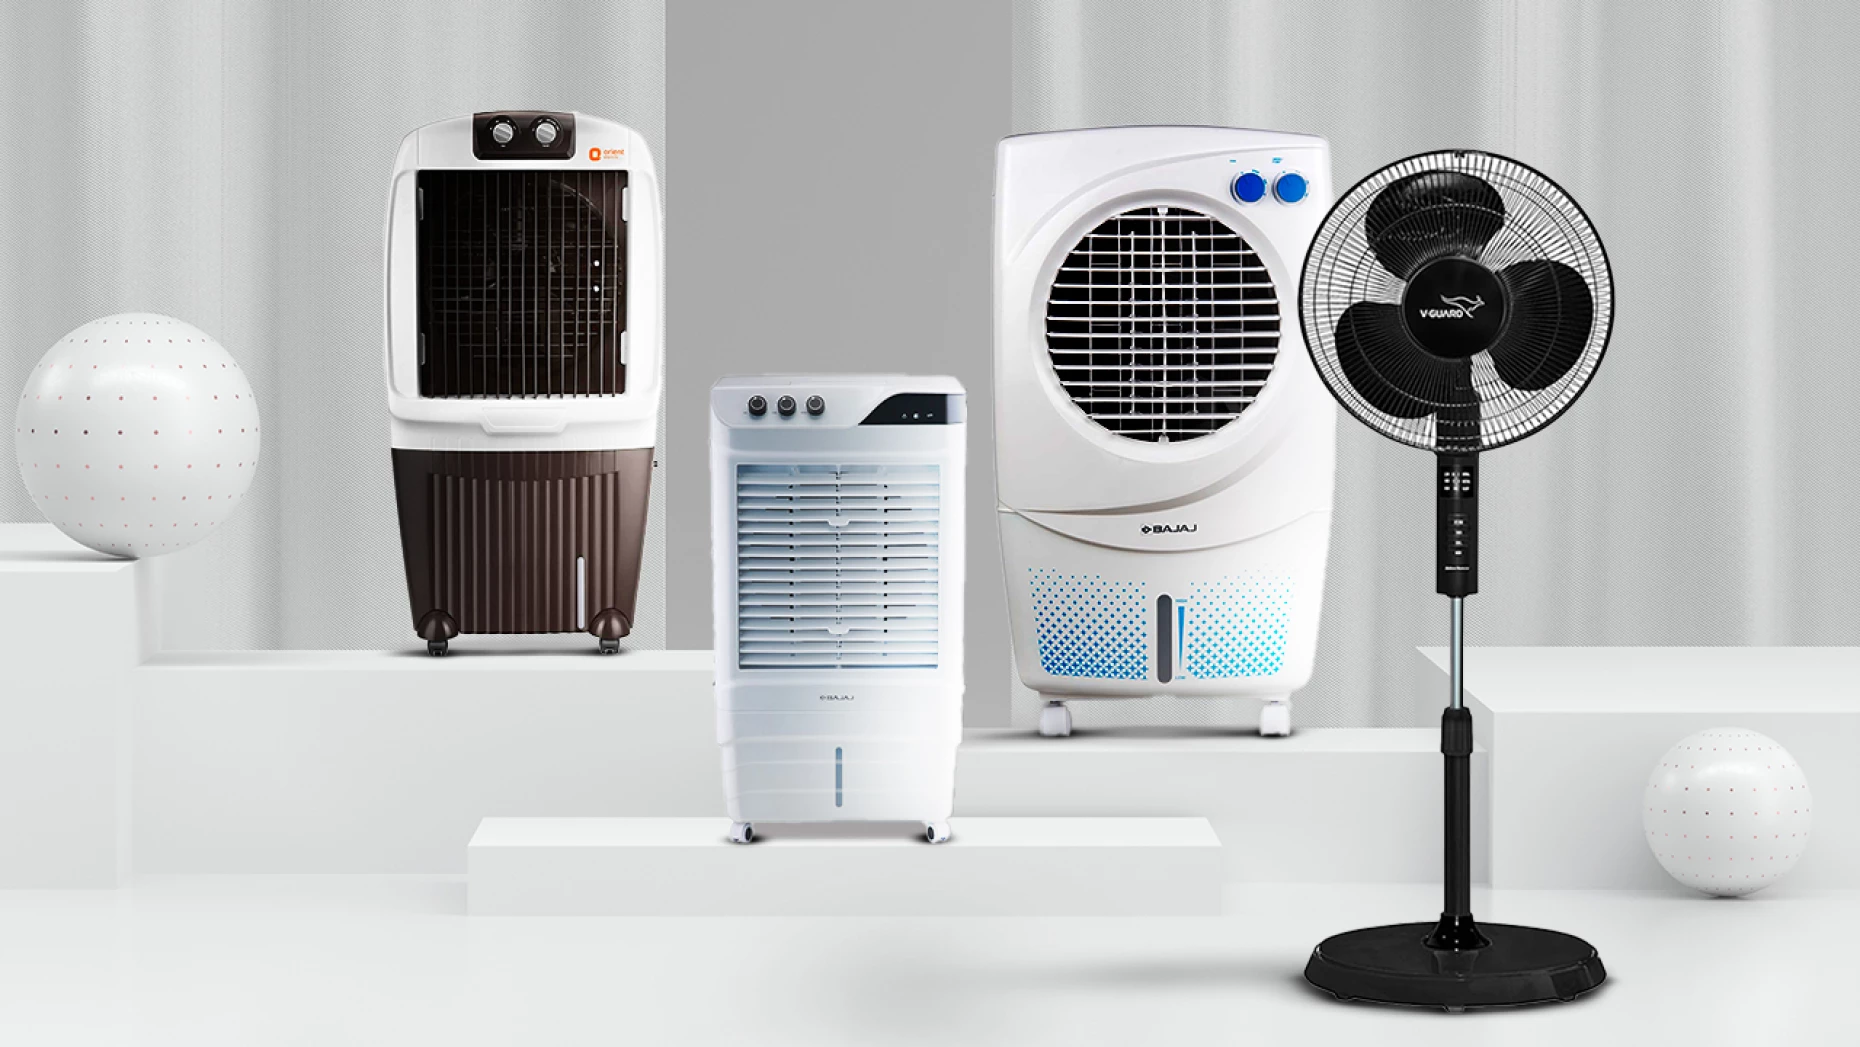 The best portable air coolers and fans to help you stay cool in the summer